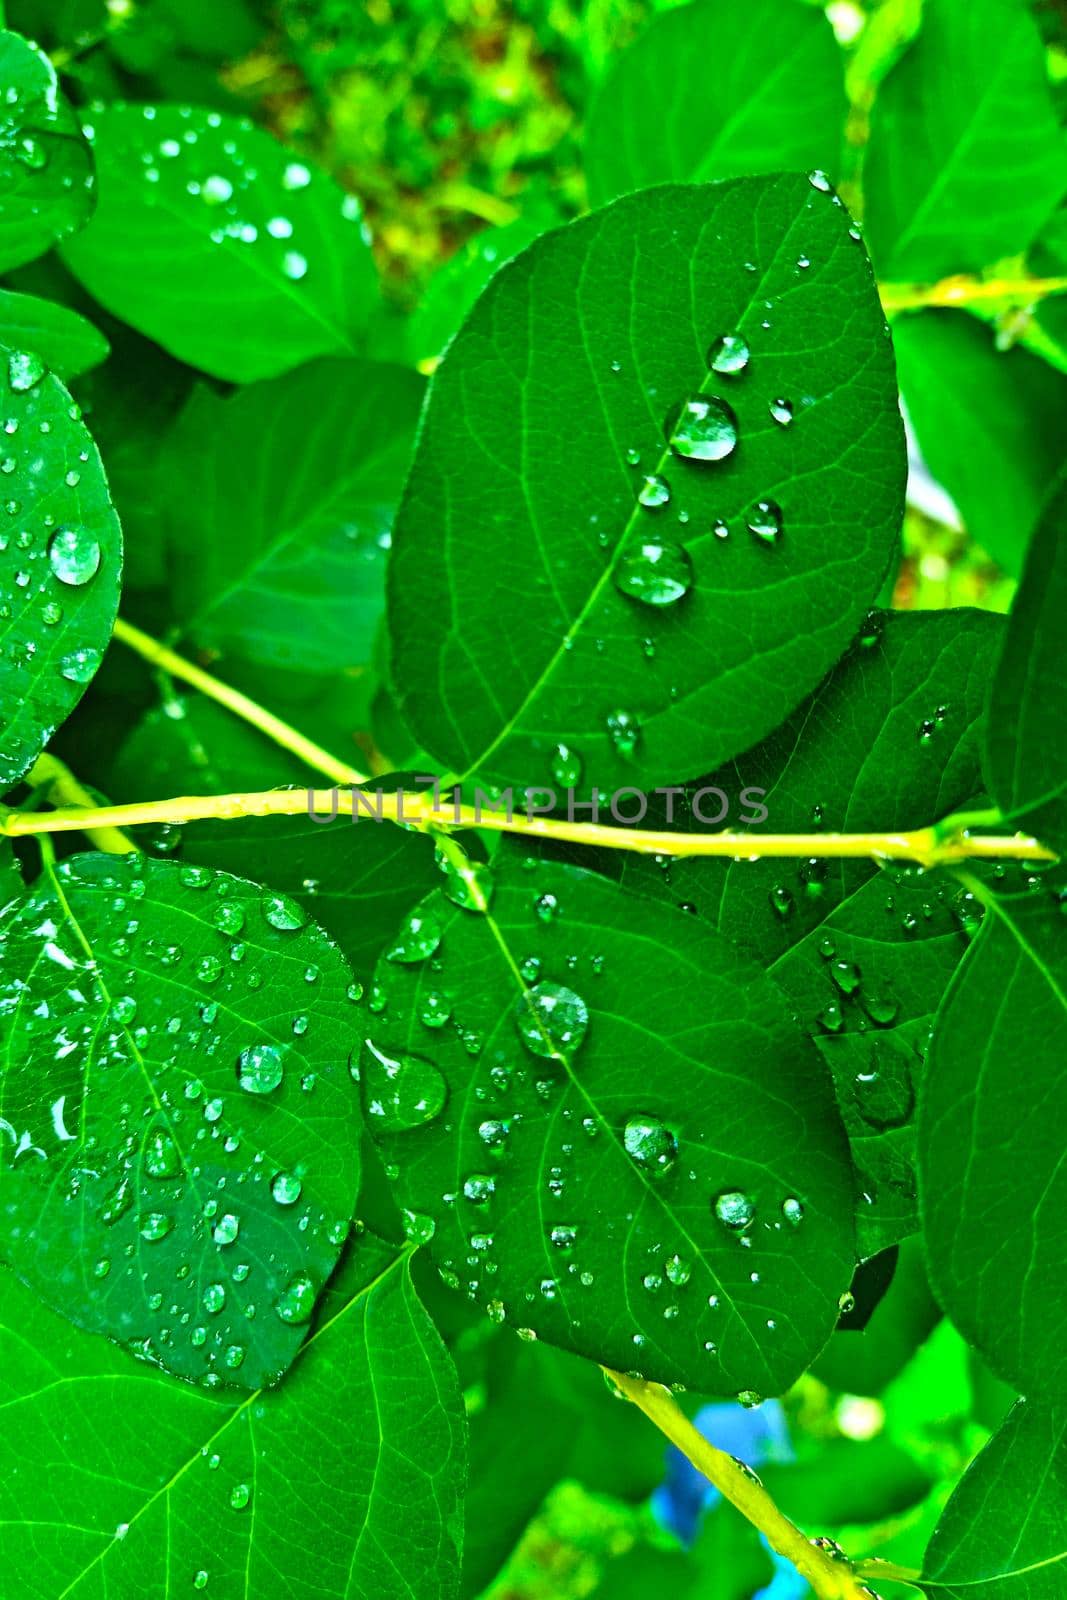 On the green leaves of a bush or tree are raindrops